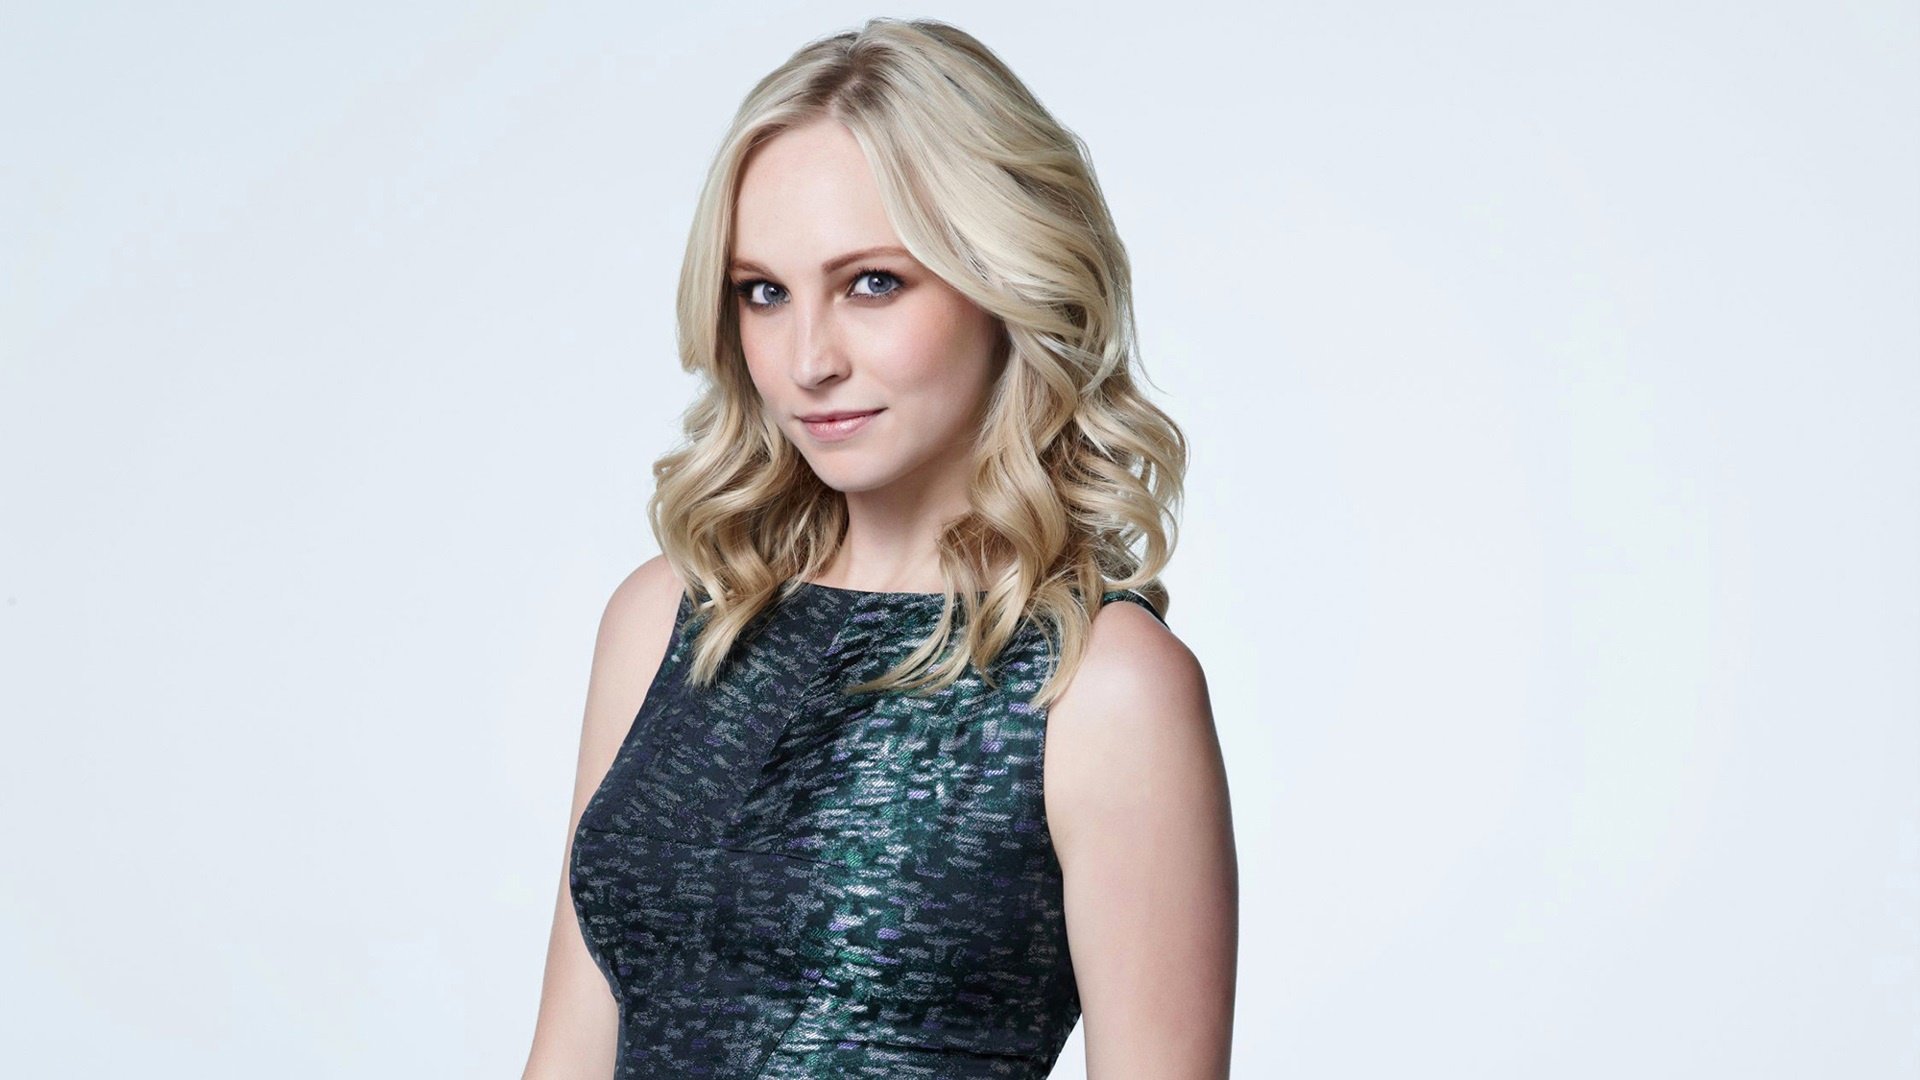 Download full hd 1920x1080 Candice Accola PC background ID:35286 for free